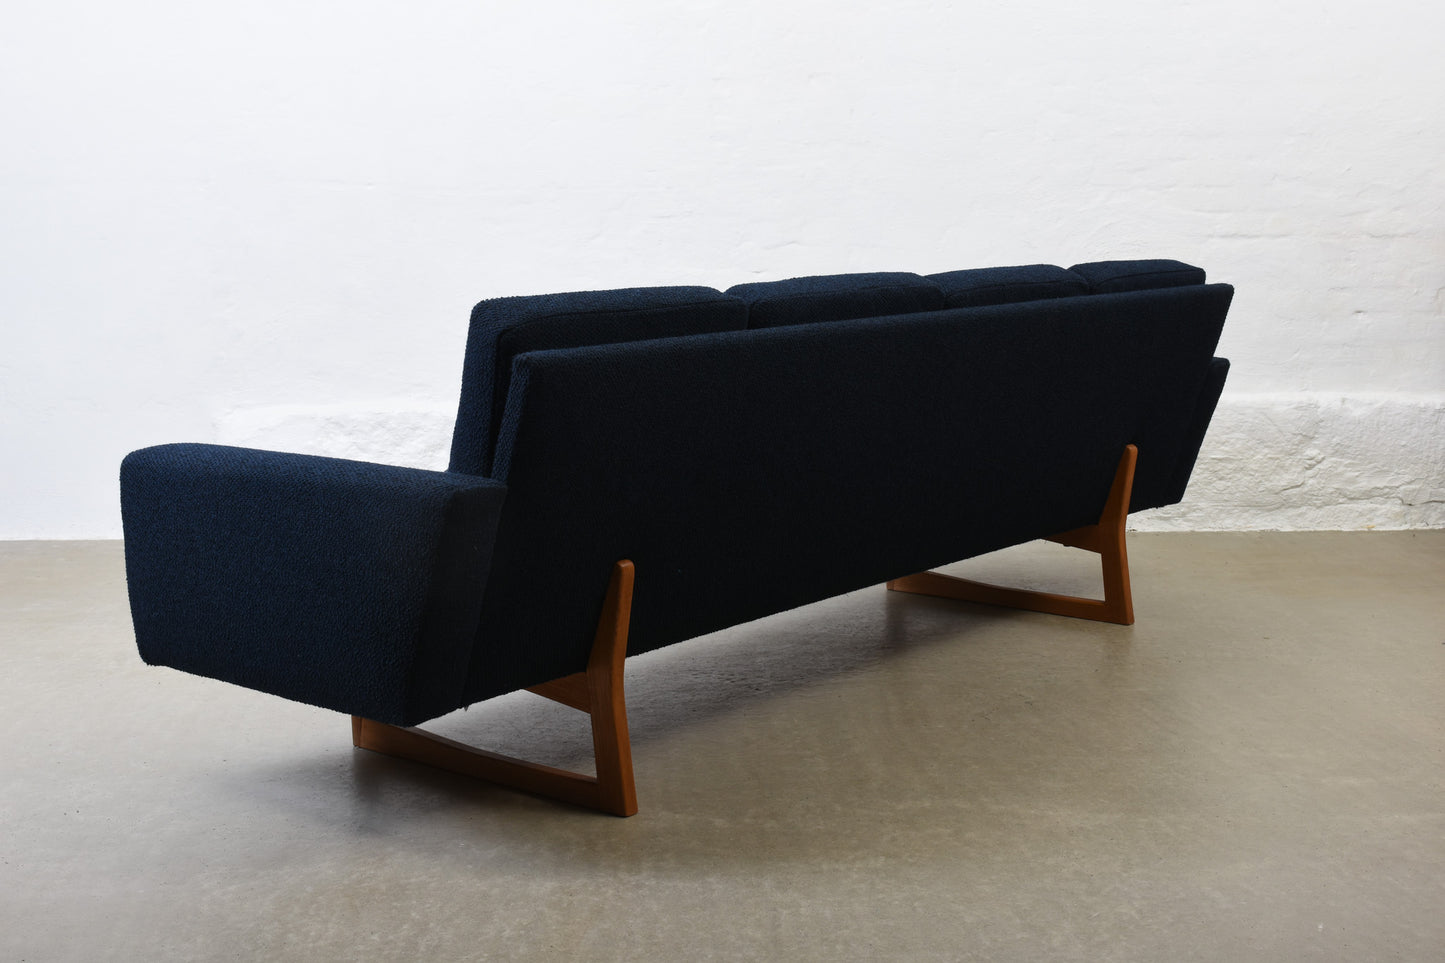 Newly reupholstered: 1960s four seater on oak sleigh legs